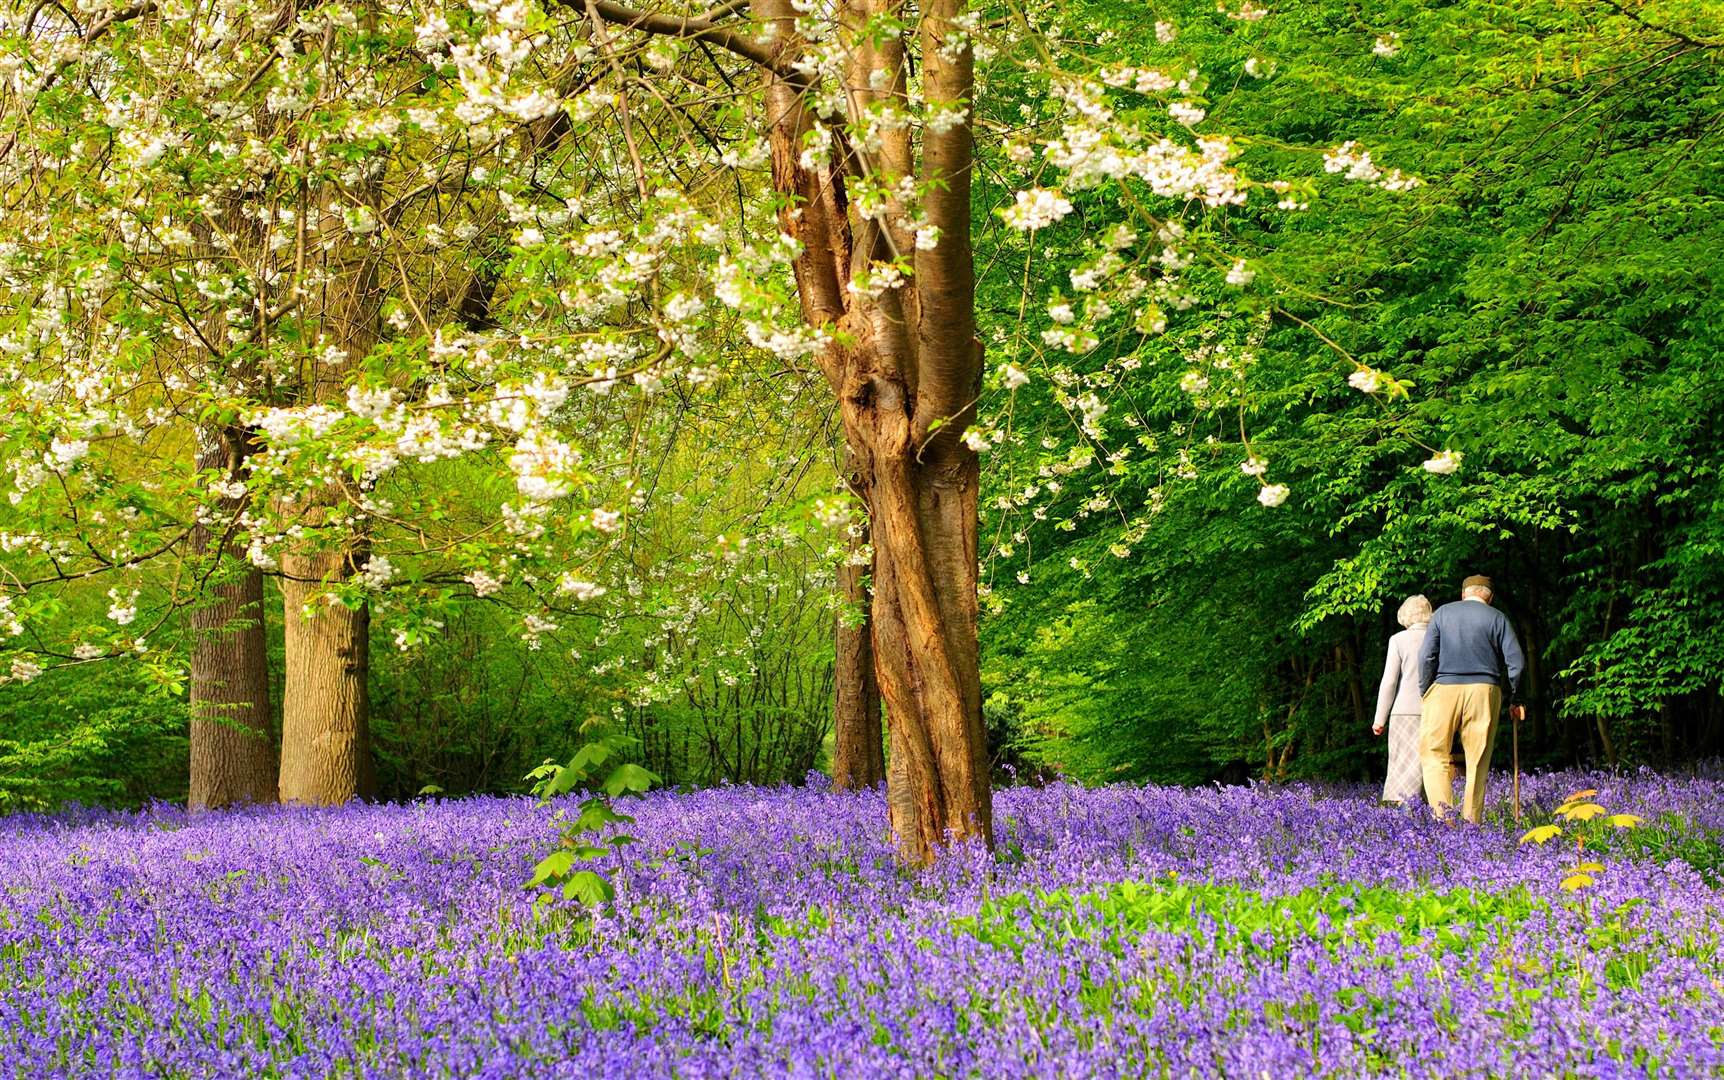 The bluebells will be on display at Hole Park this spring